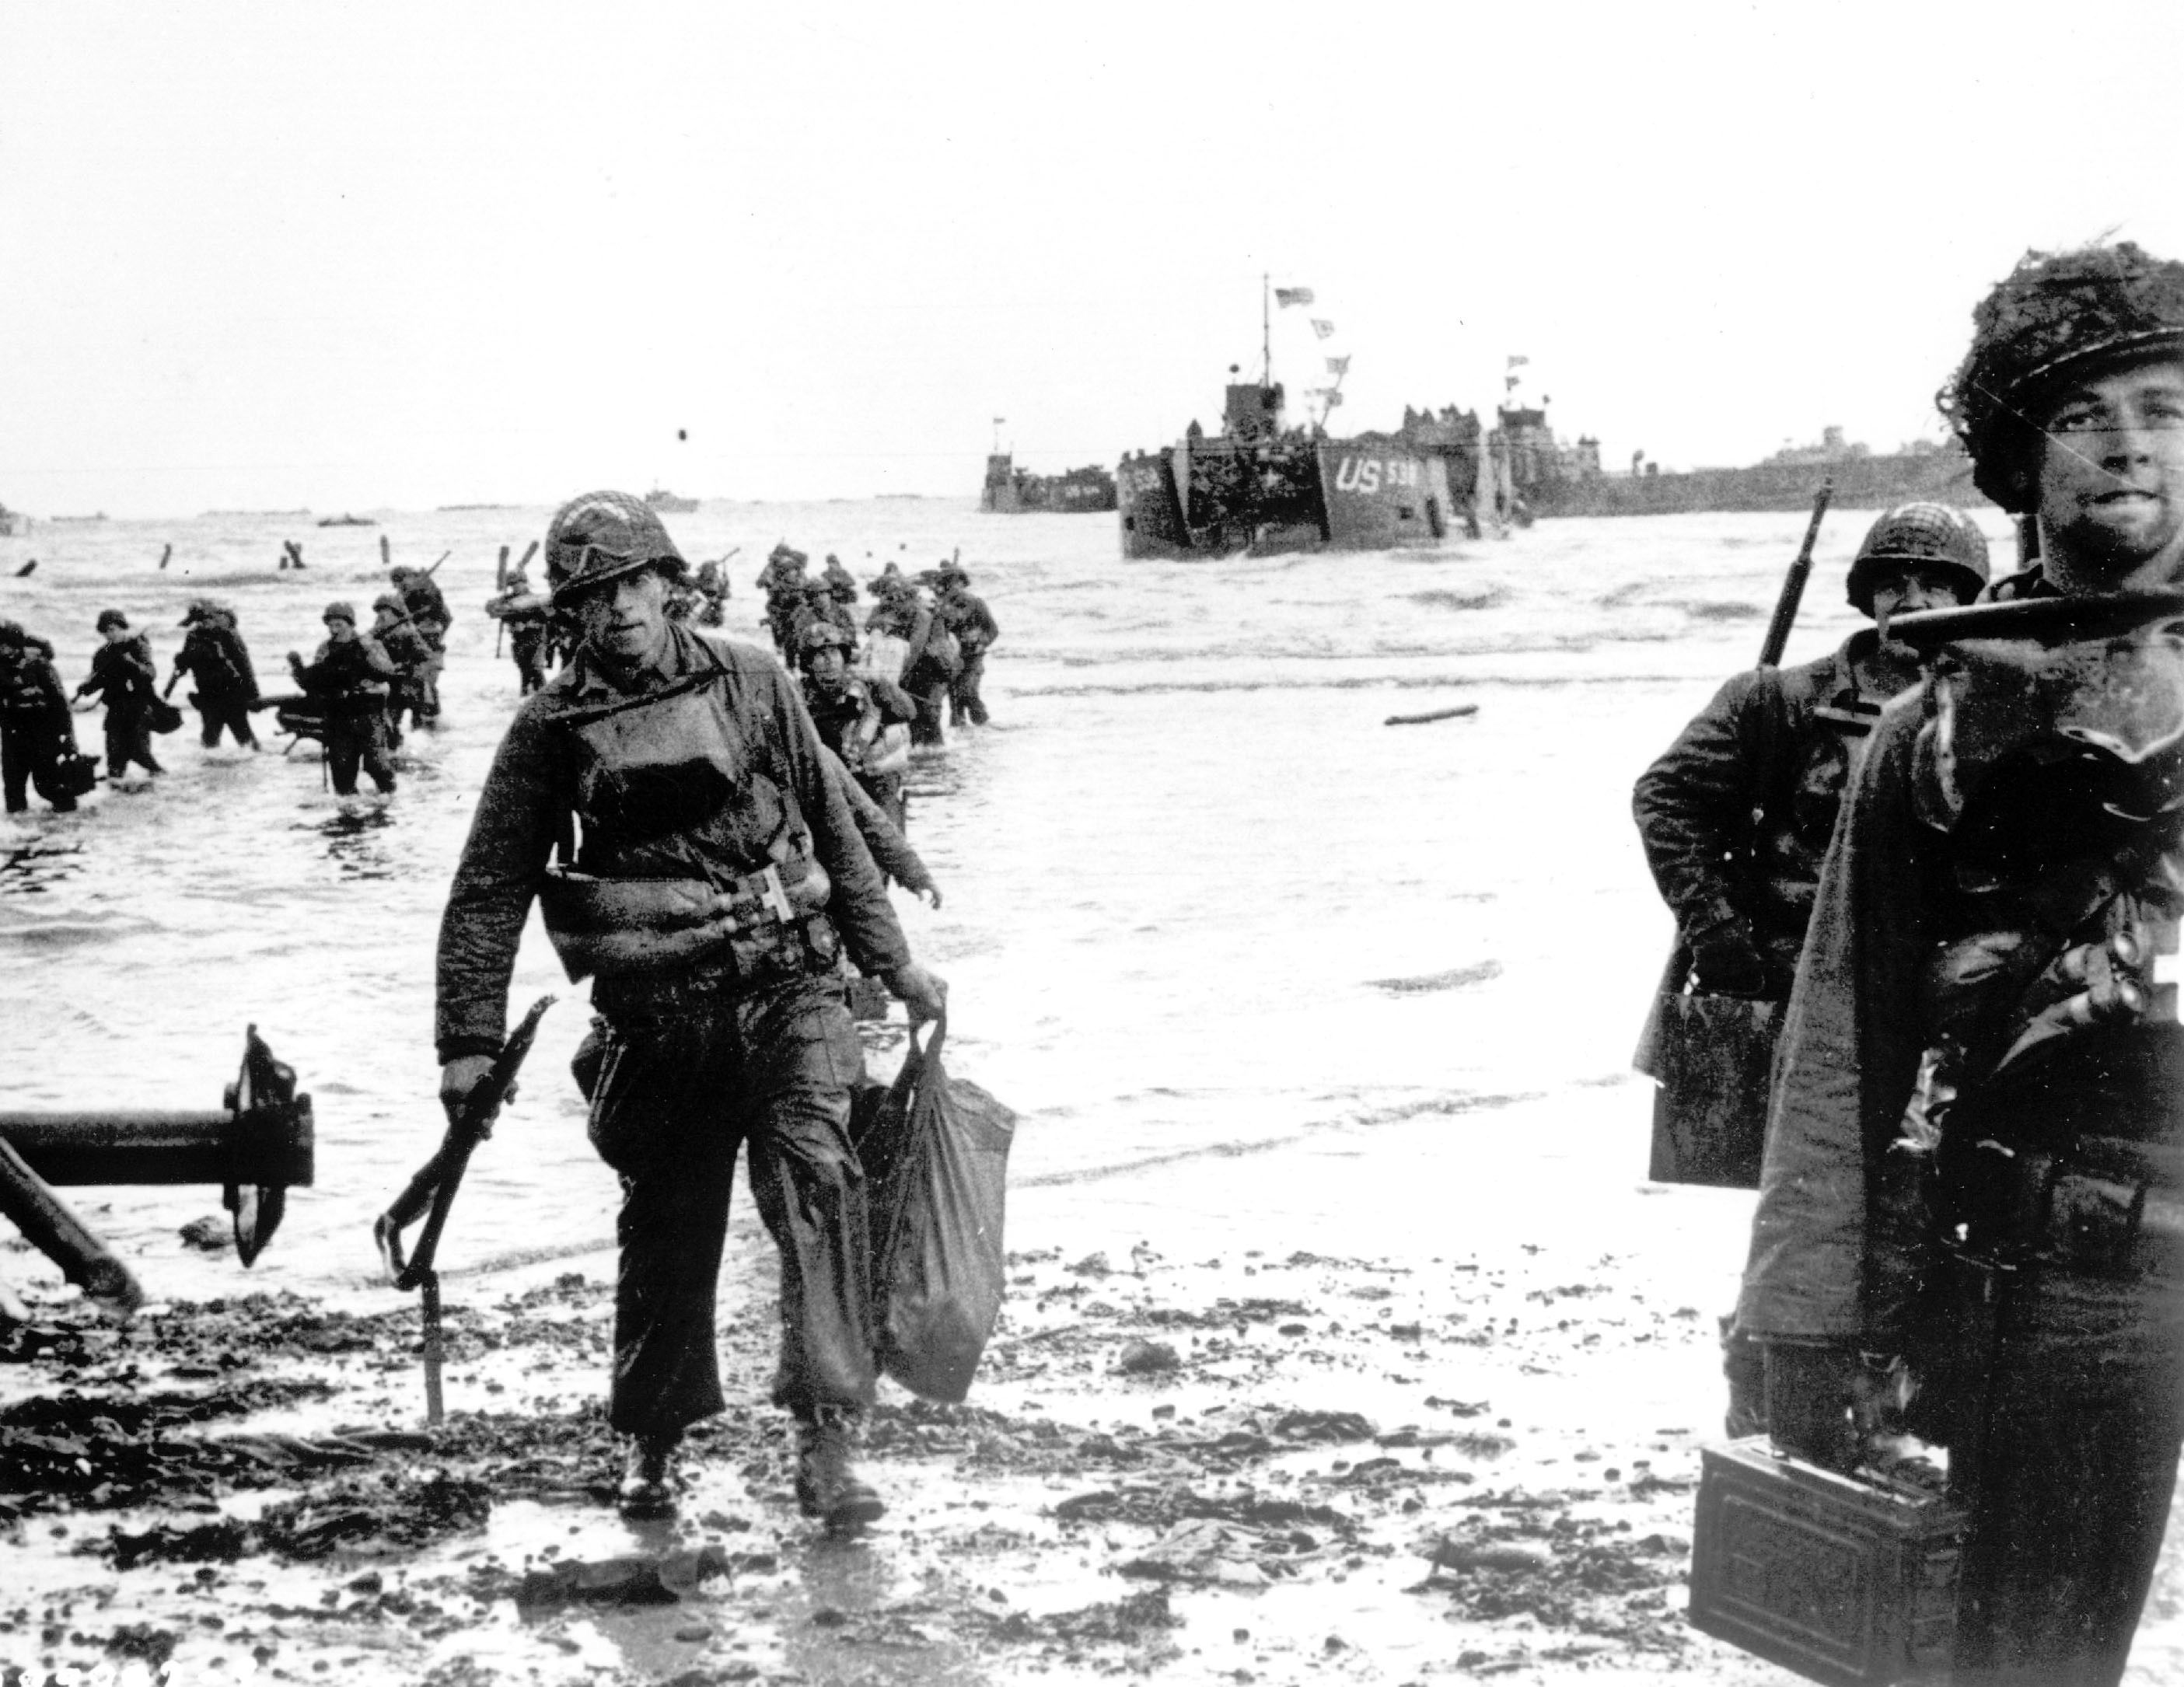 The Invasion of Normandy in World War II (D-Day)